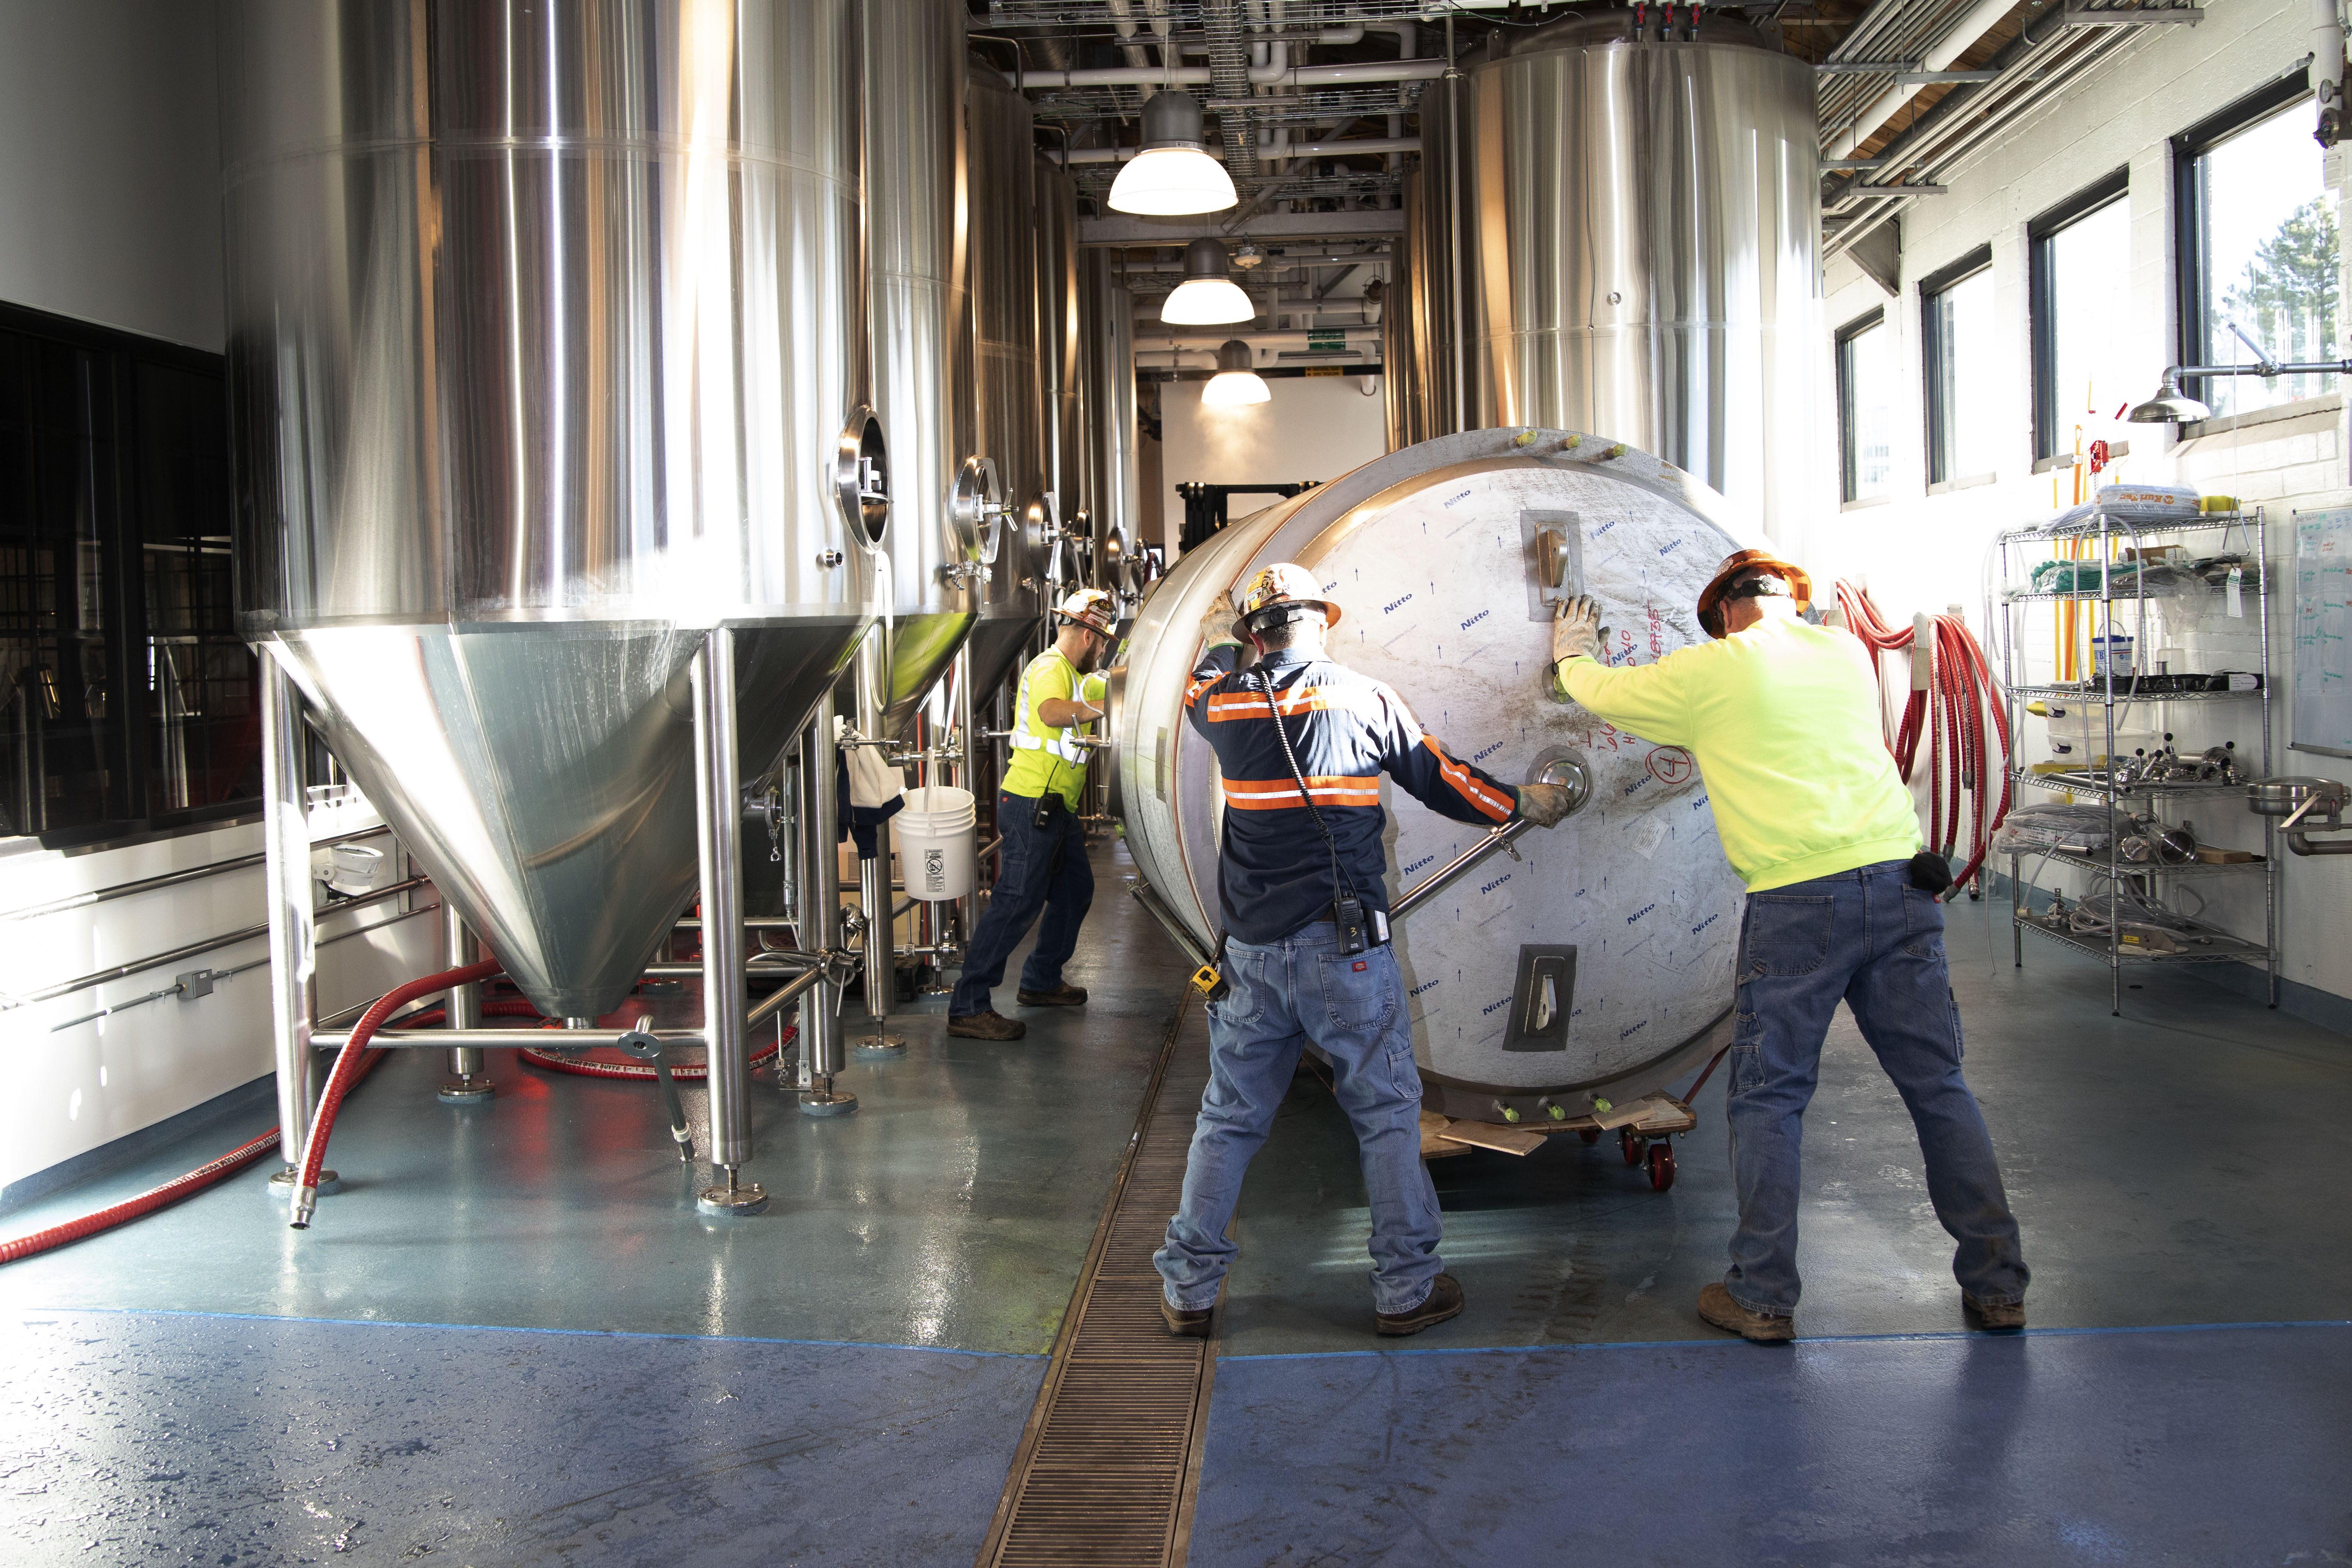 Blue Moon expanding capacity at RiNo brewery in Denver as global demand soars | Molson Coors ...